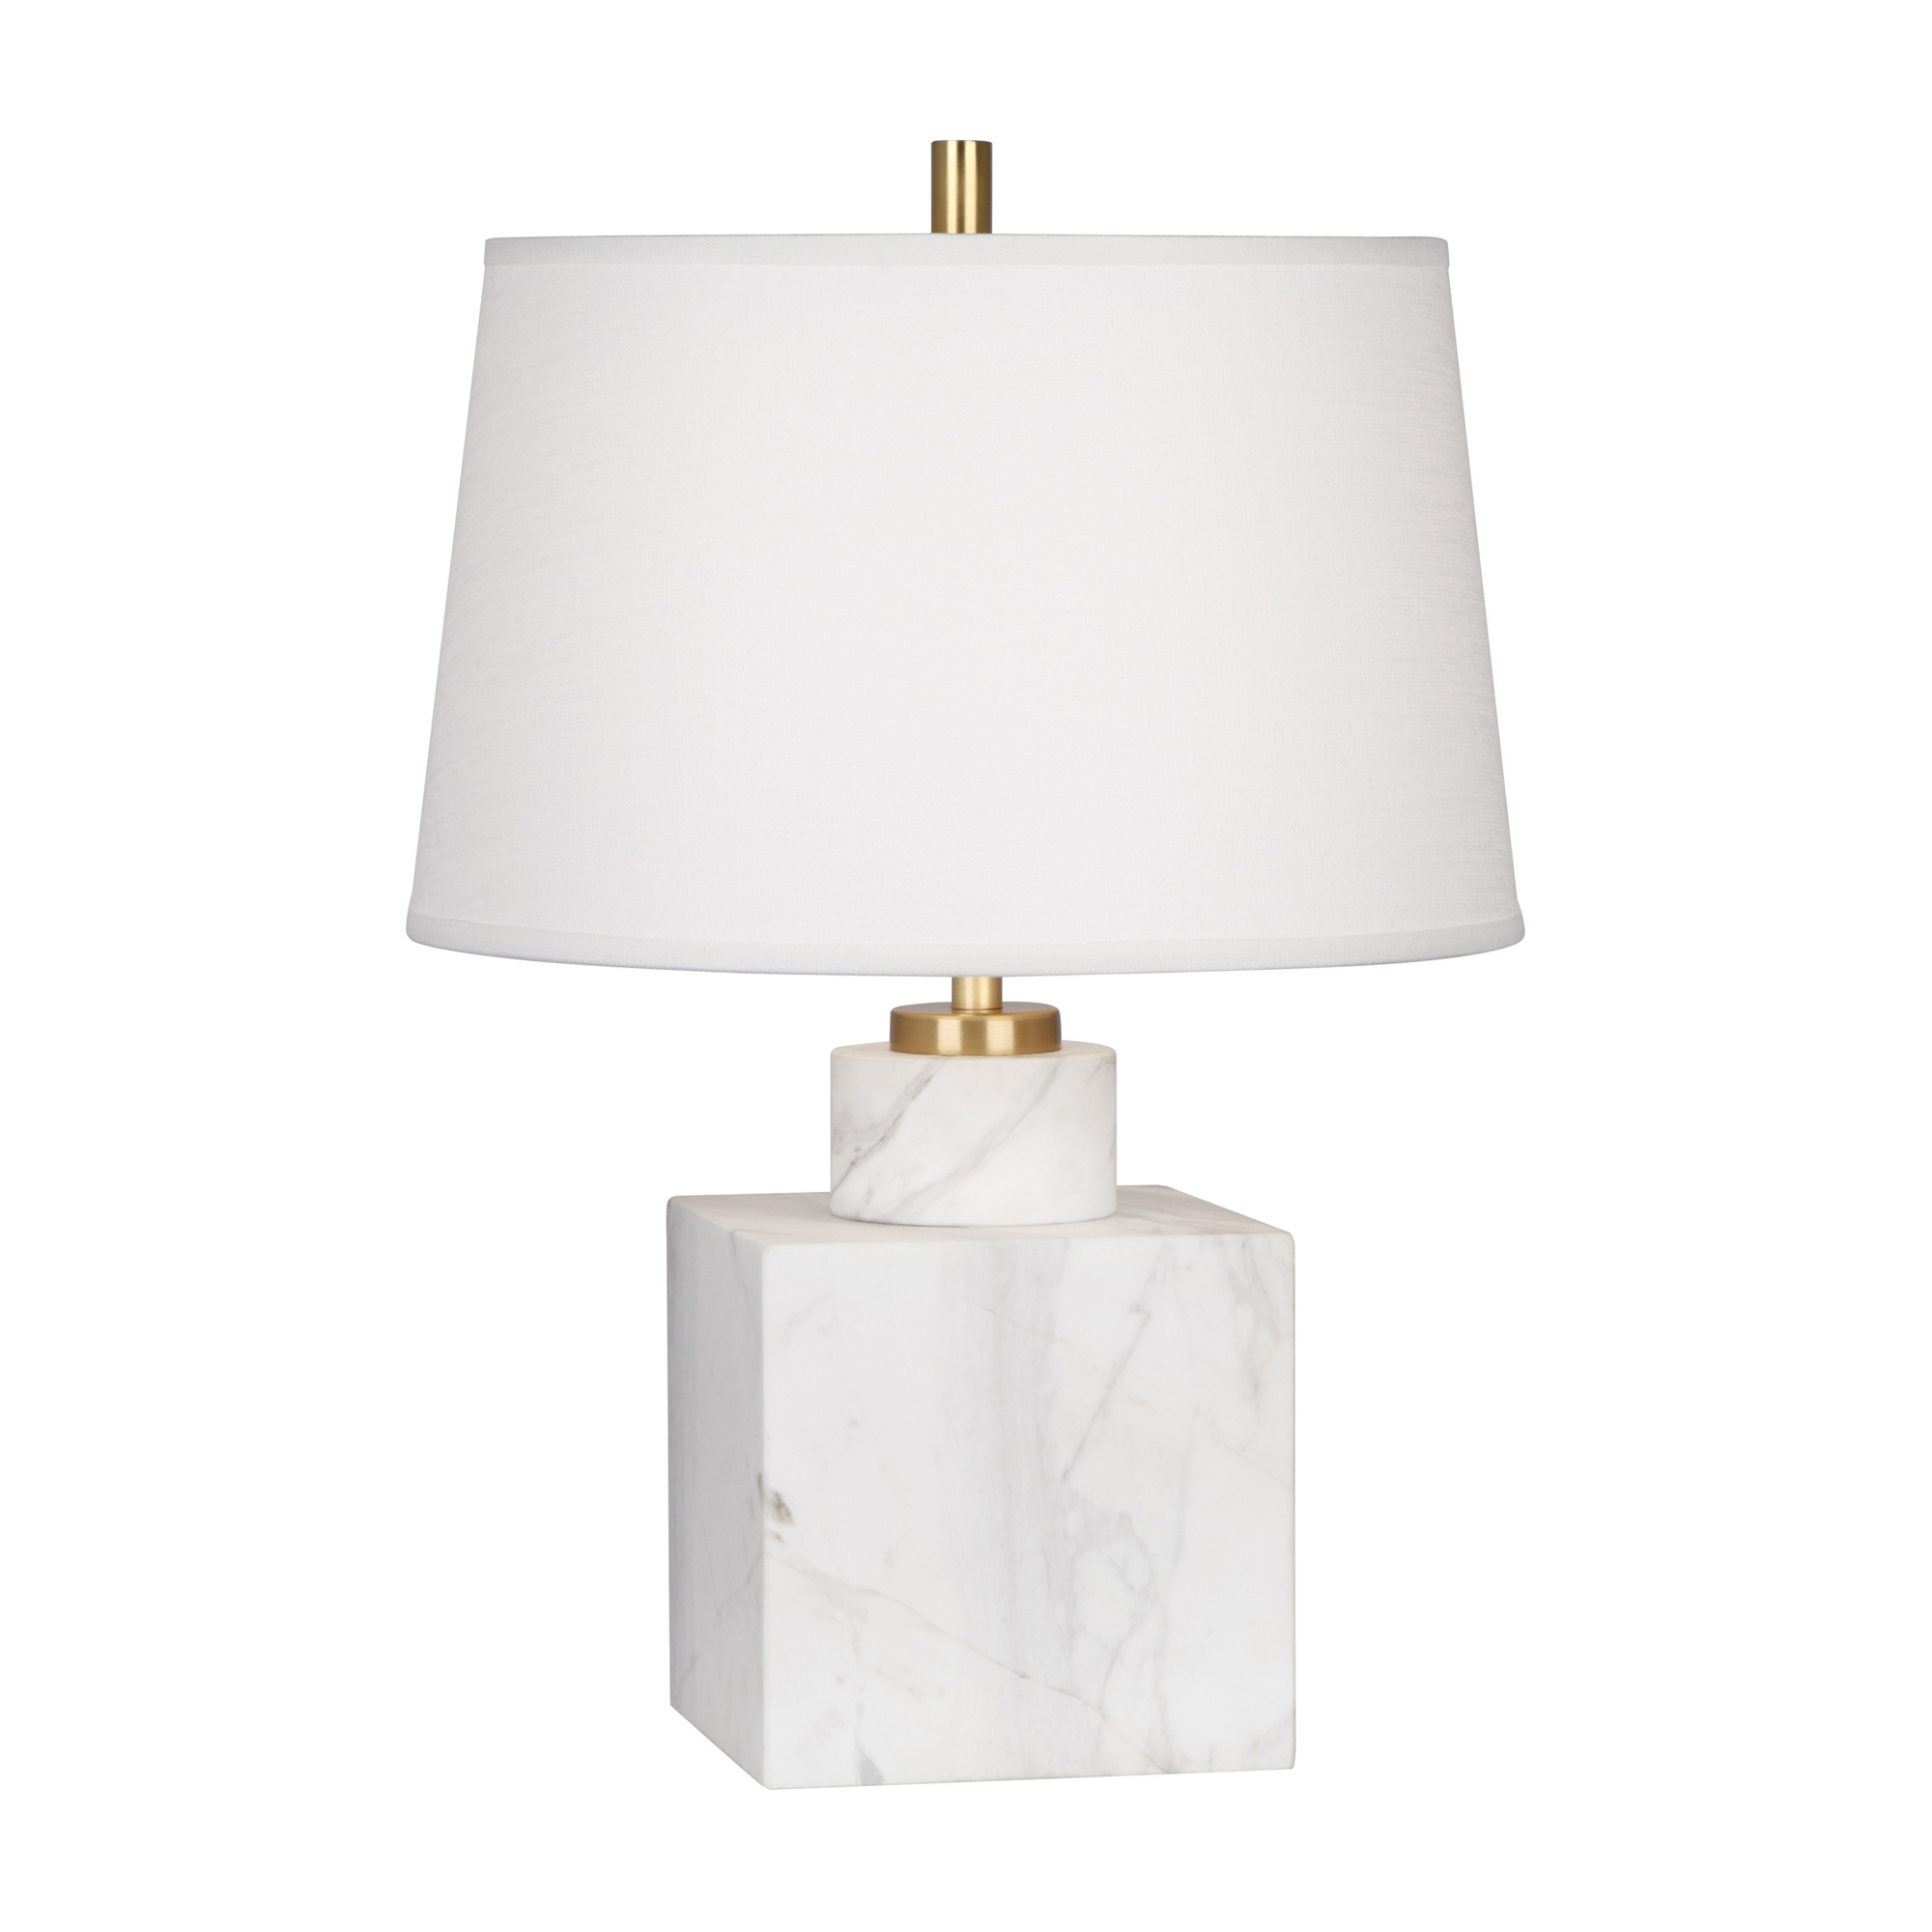 Jonathan Adler Canaan Accent Lamp Style #795